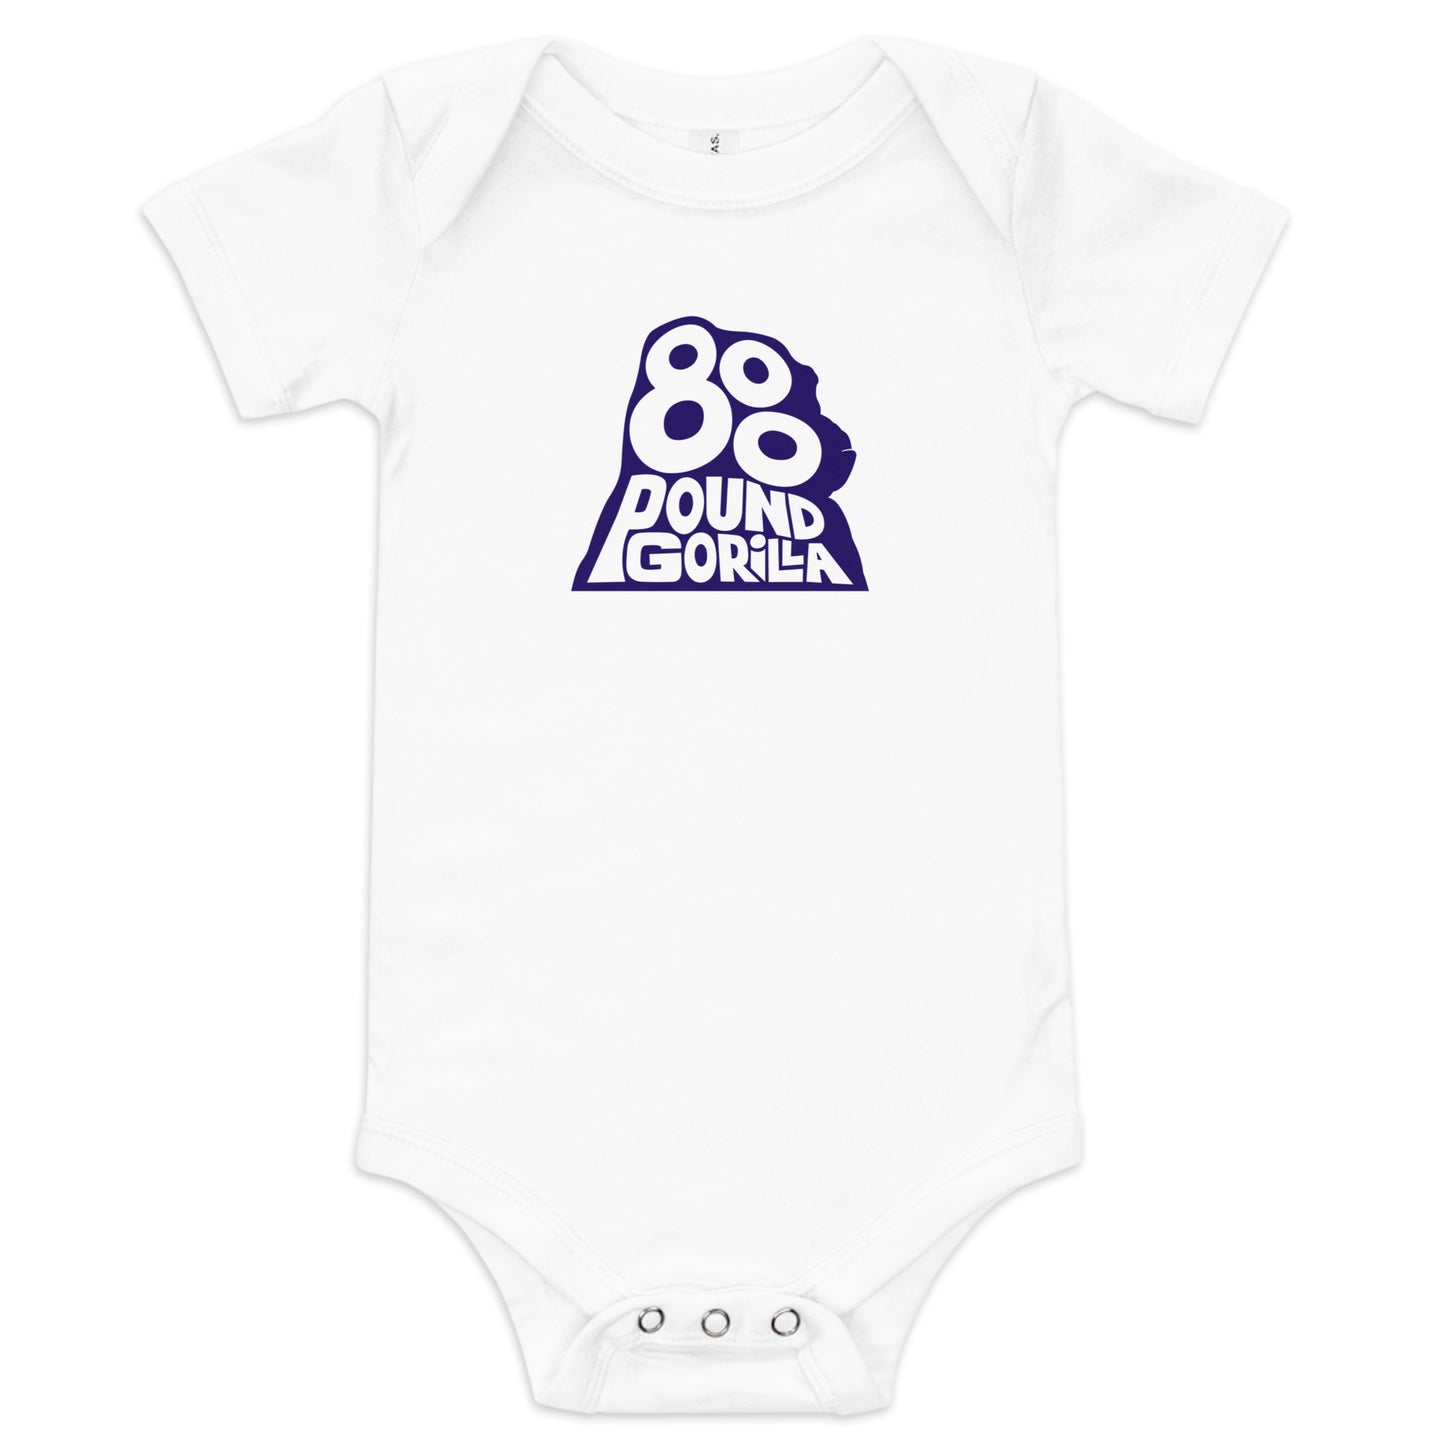 800PG - Baby short sleeve one piece